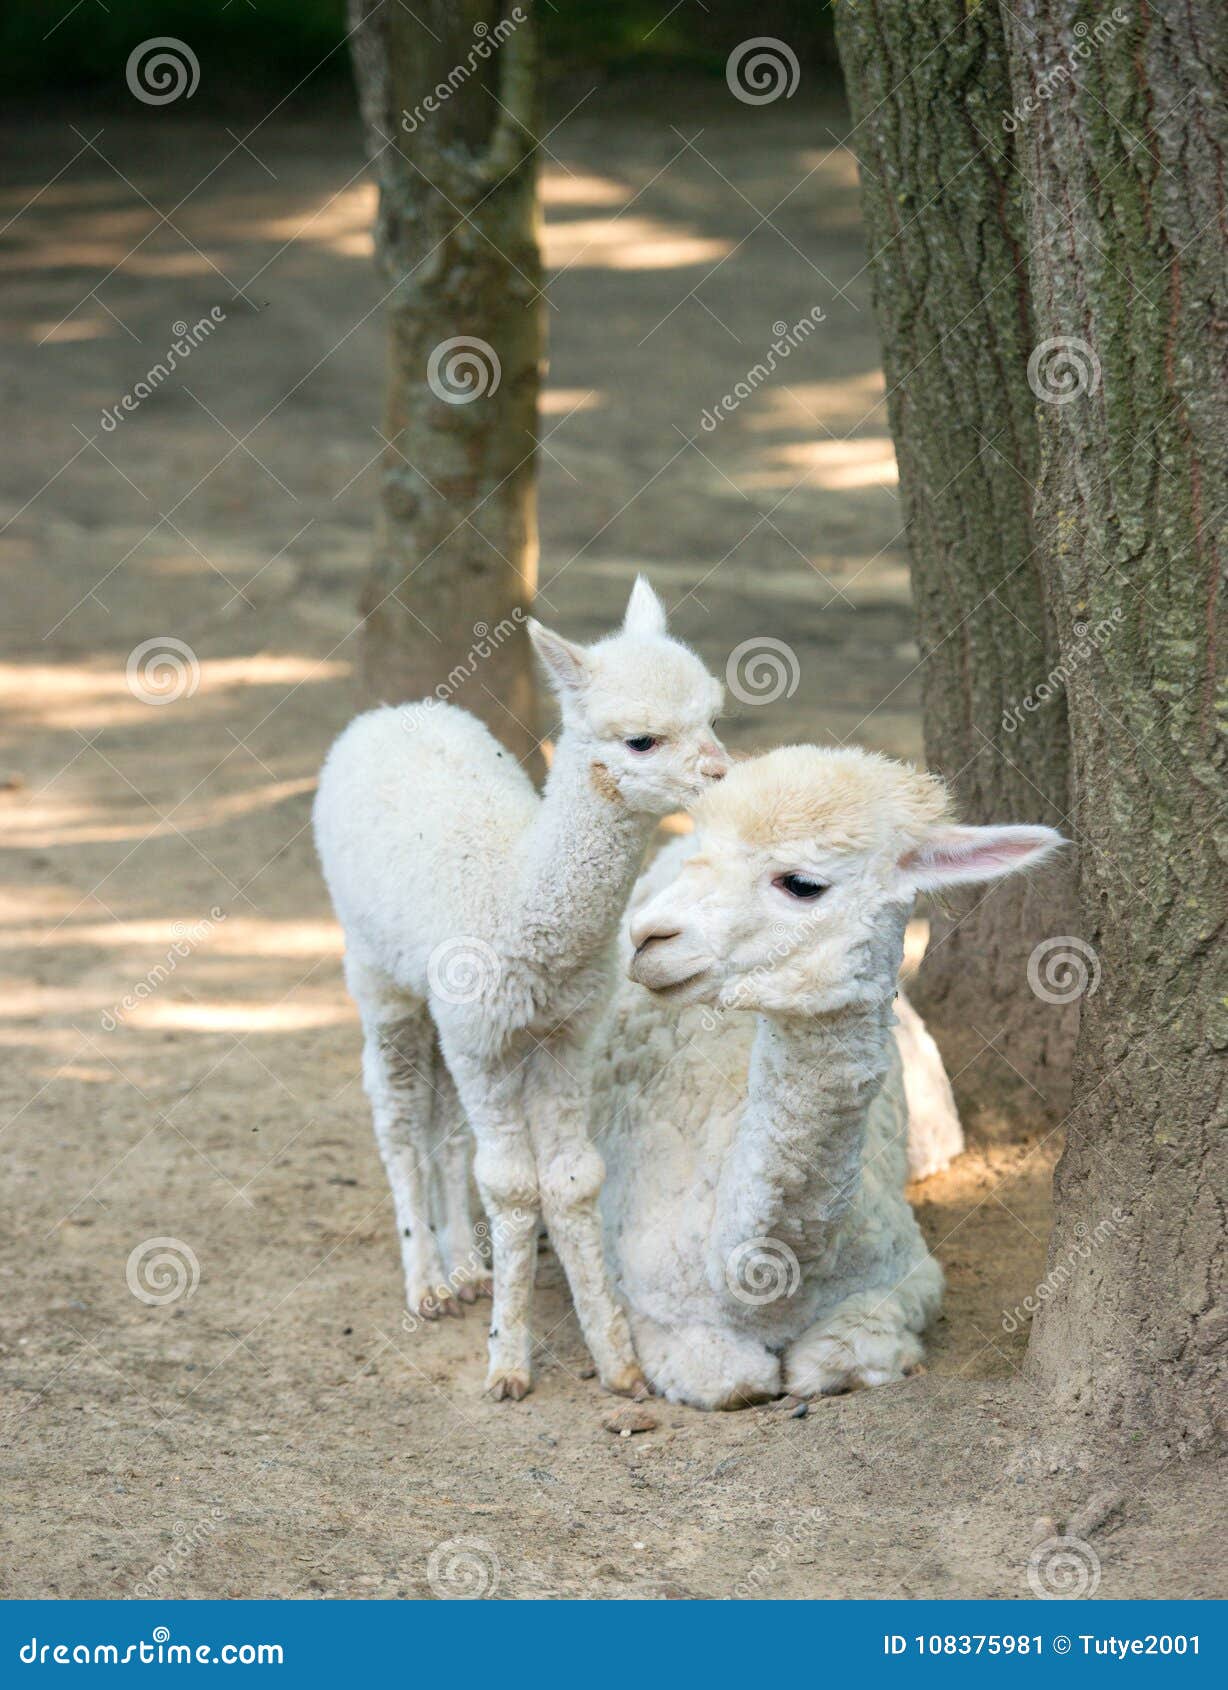 baby cria alpaca with its mother standing beside